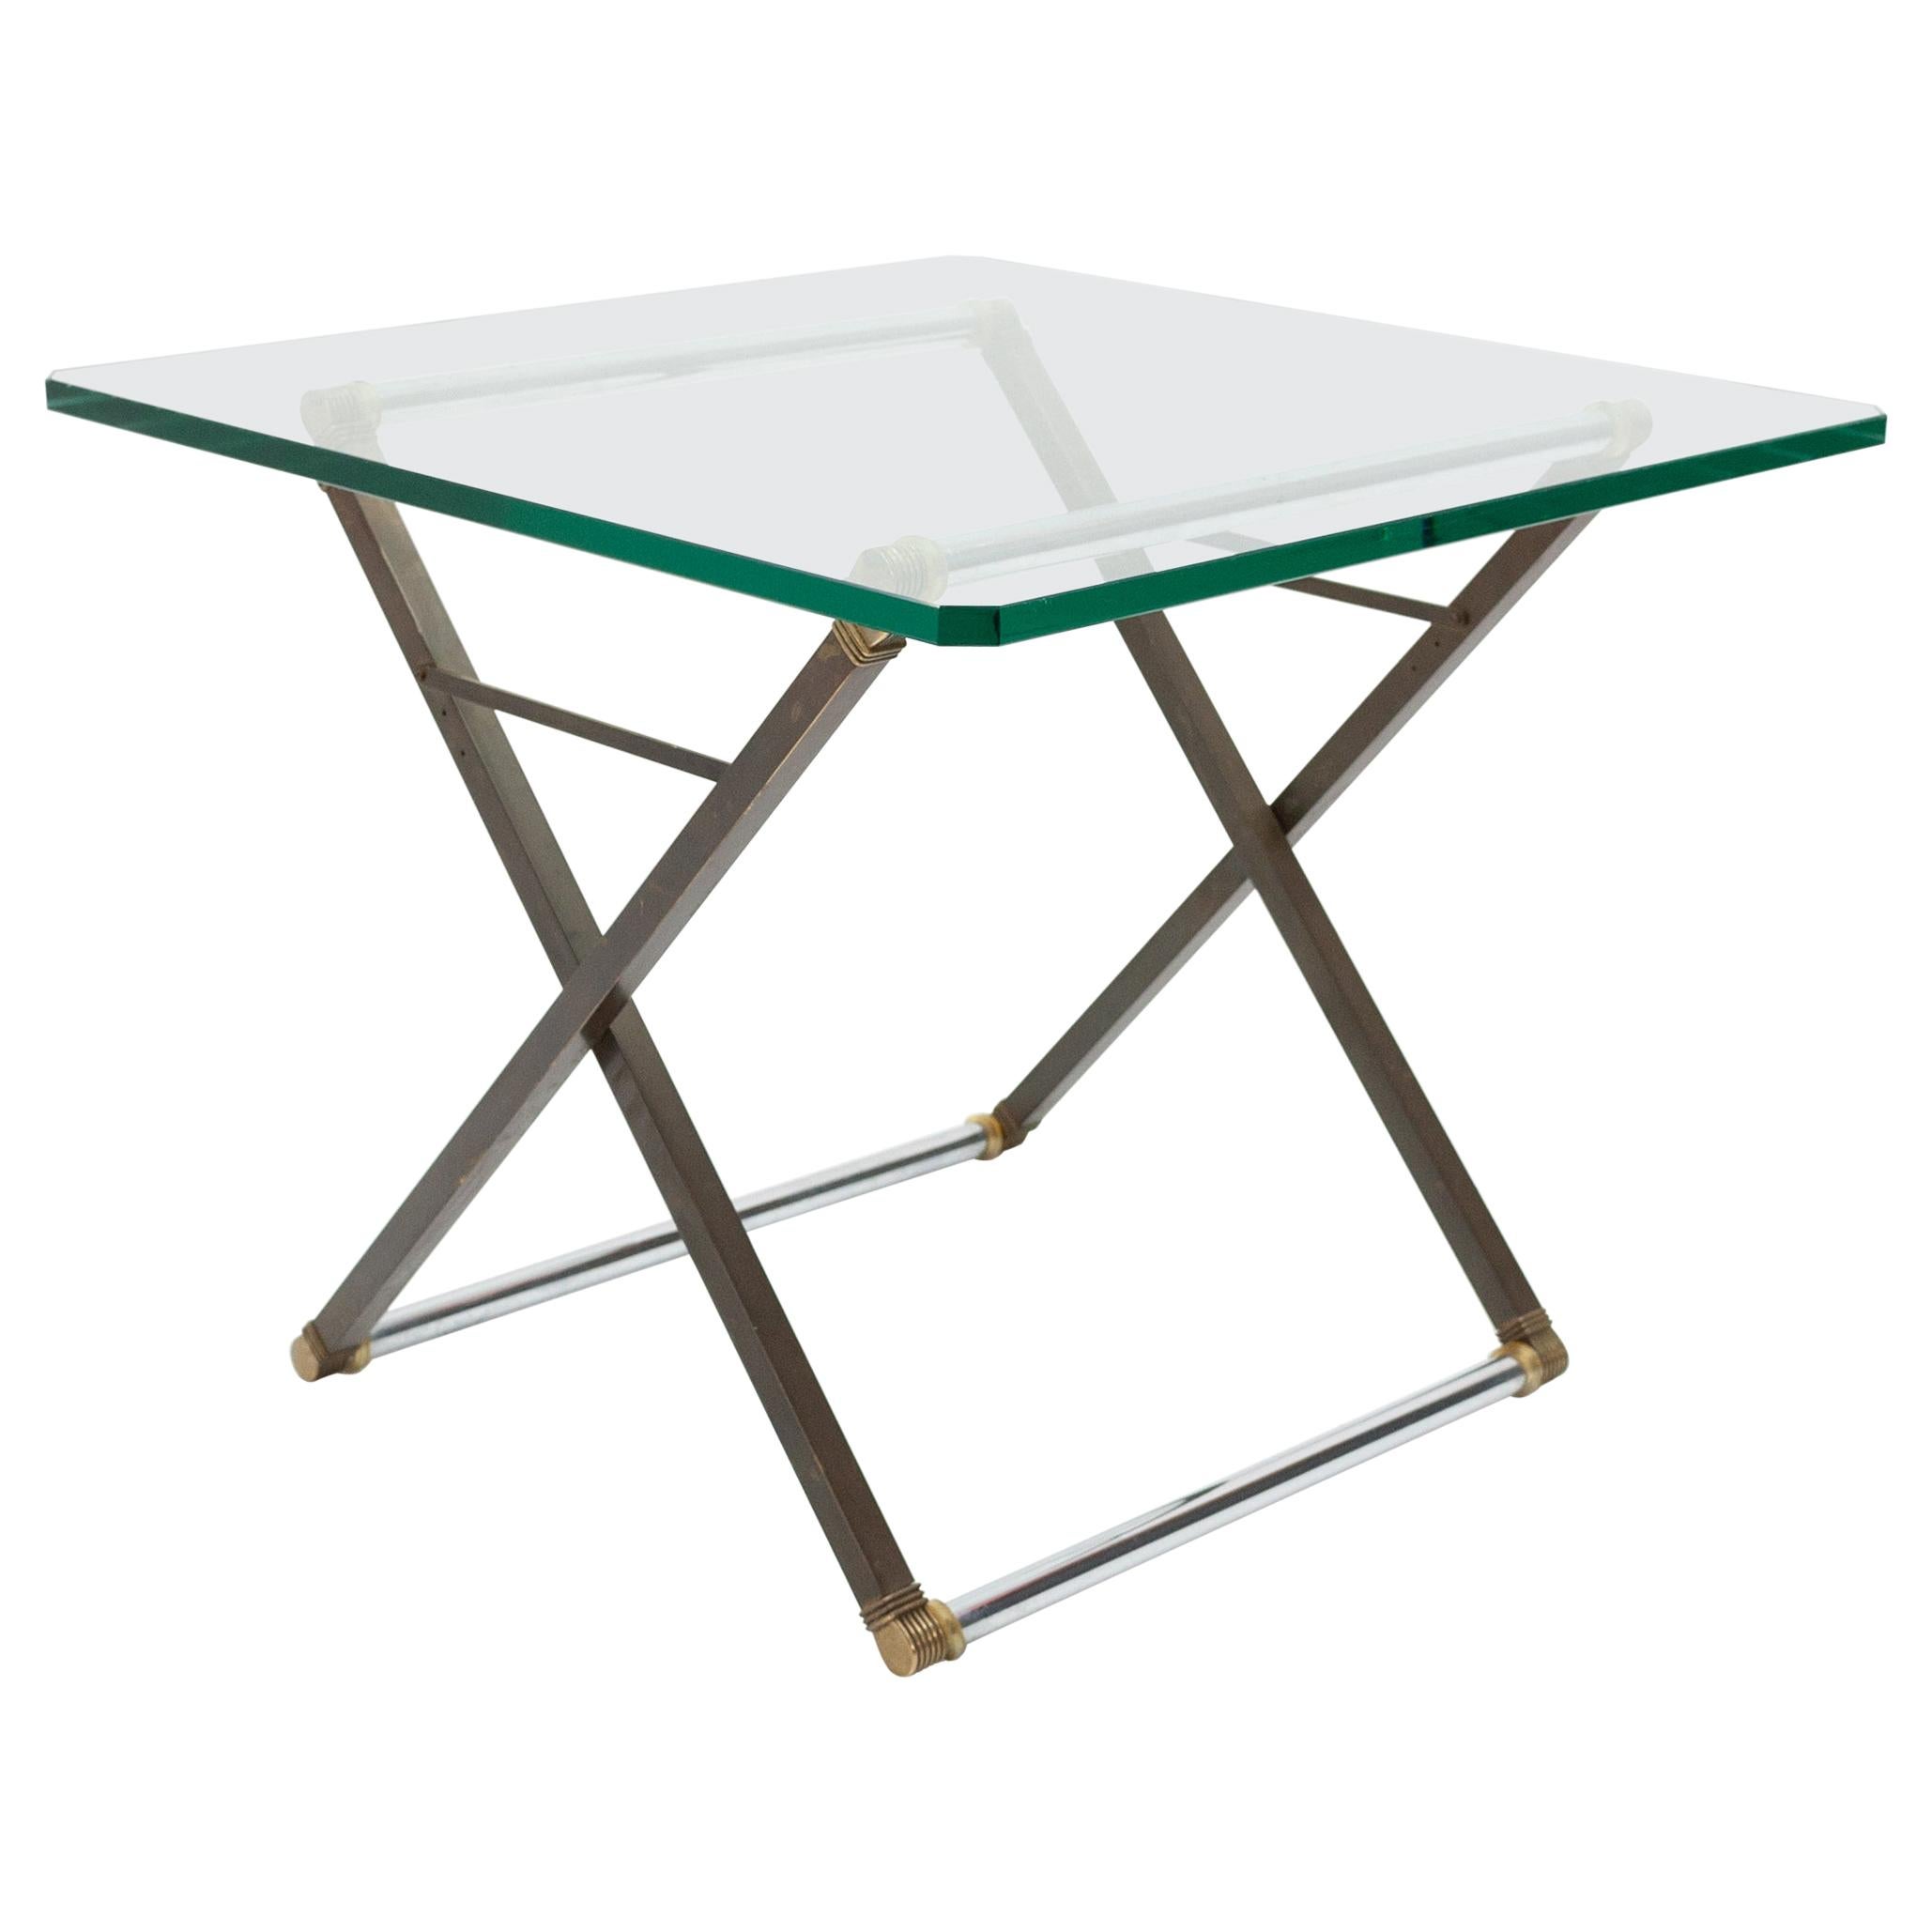 Table d'appoint Peter Ghyczy en vente